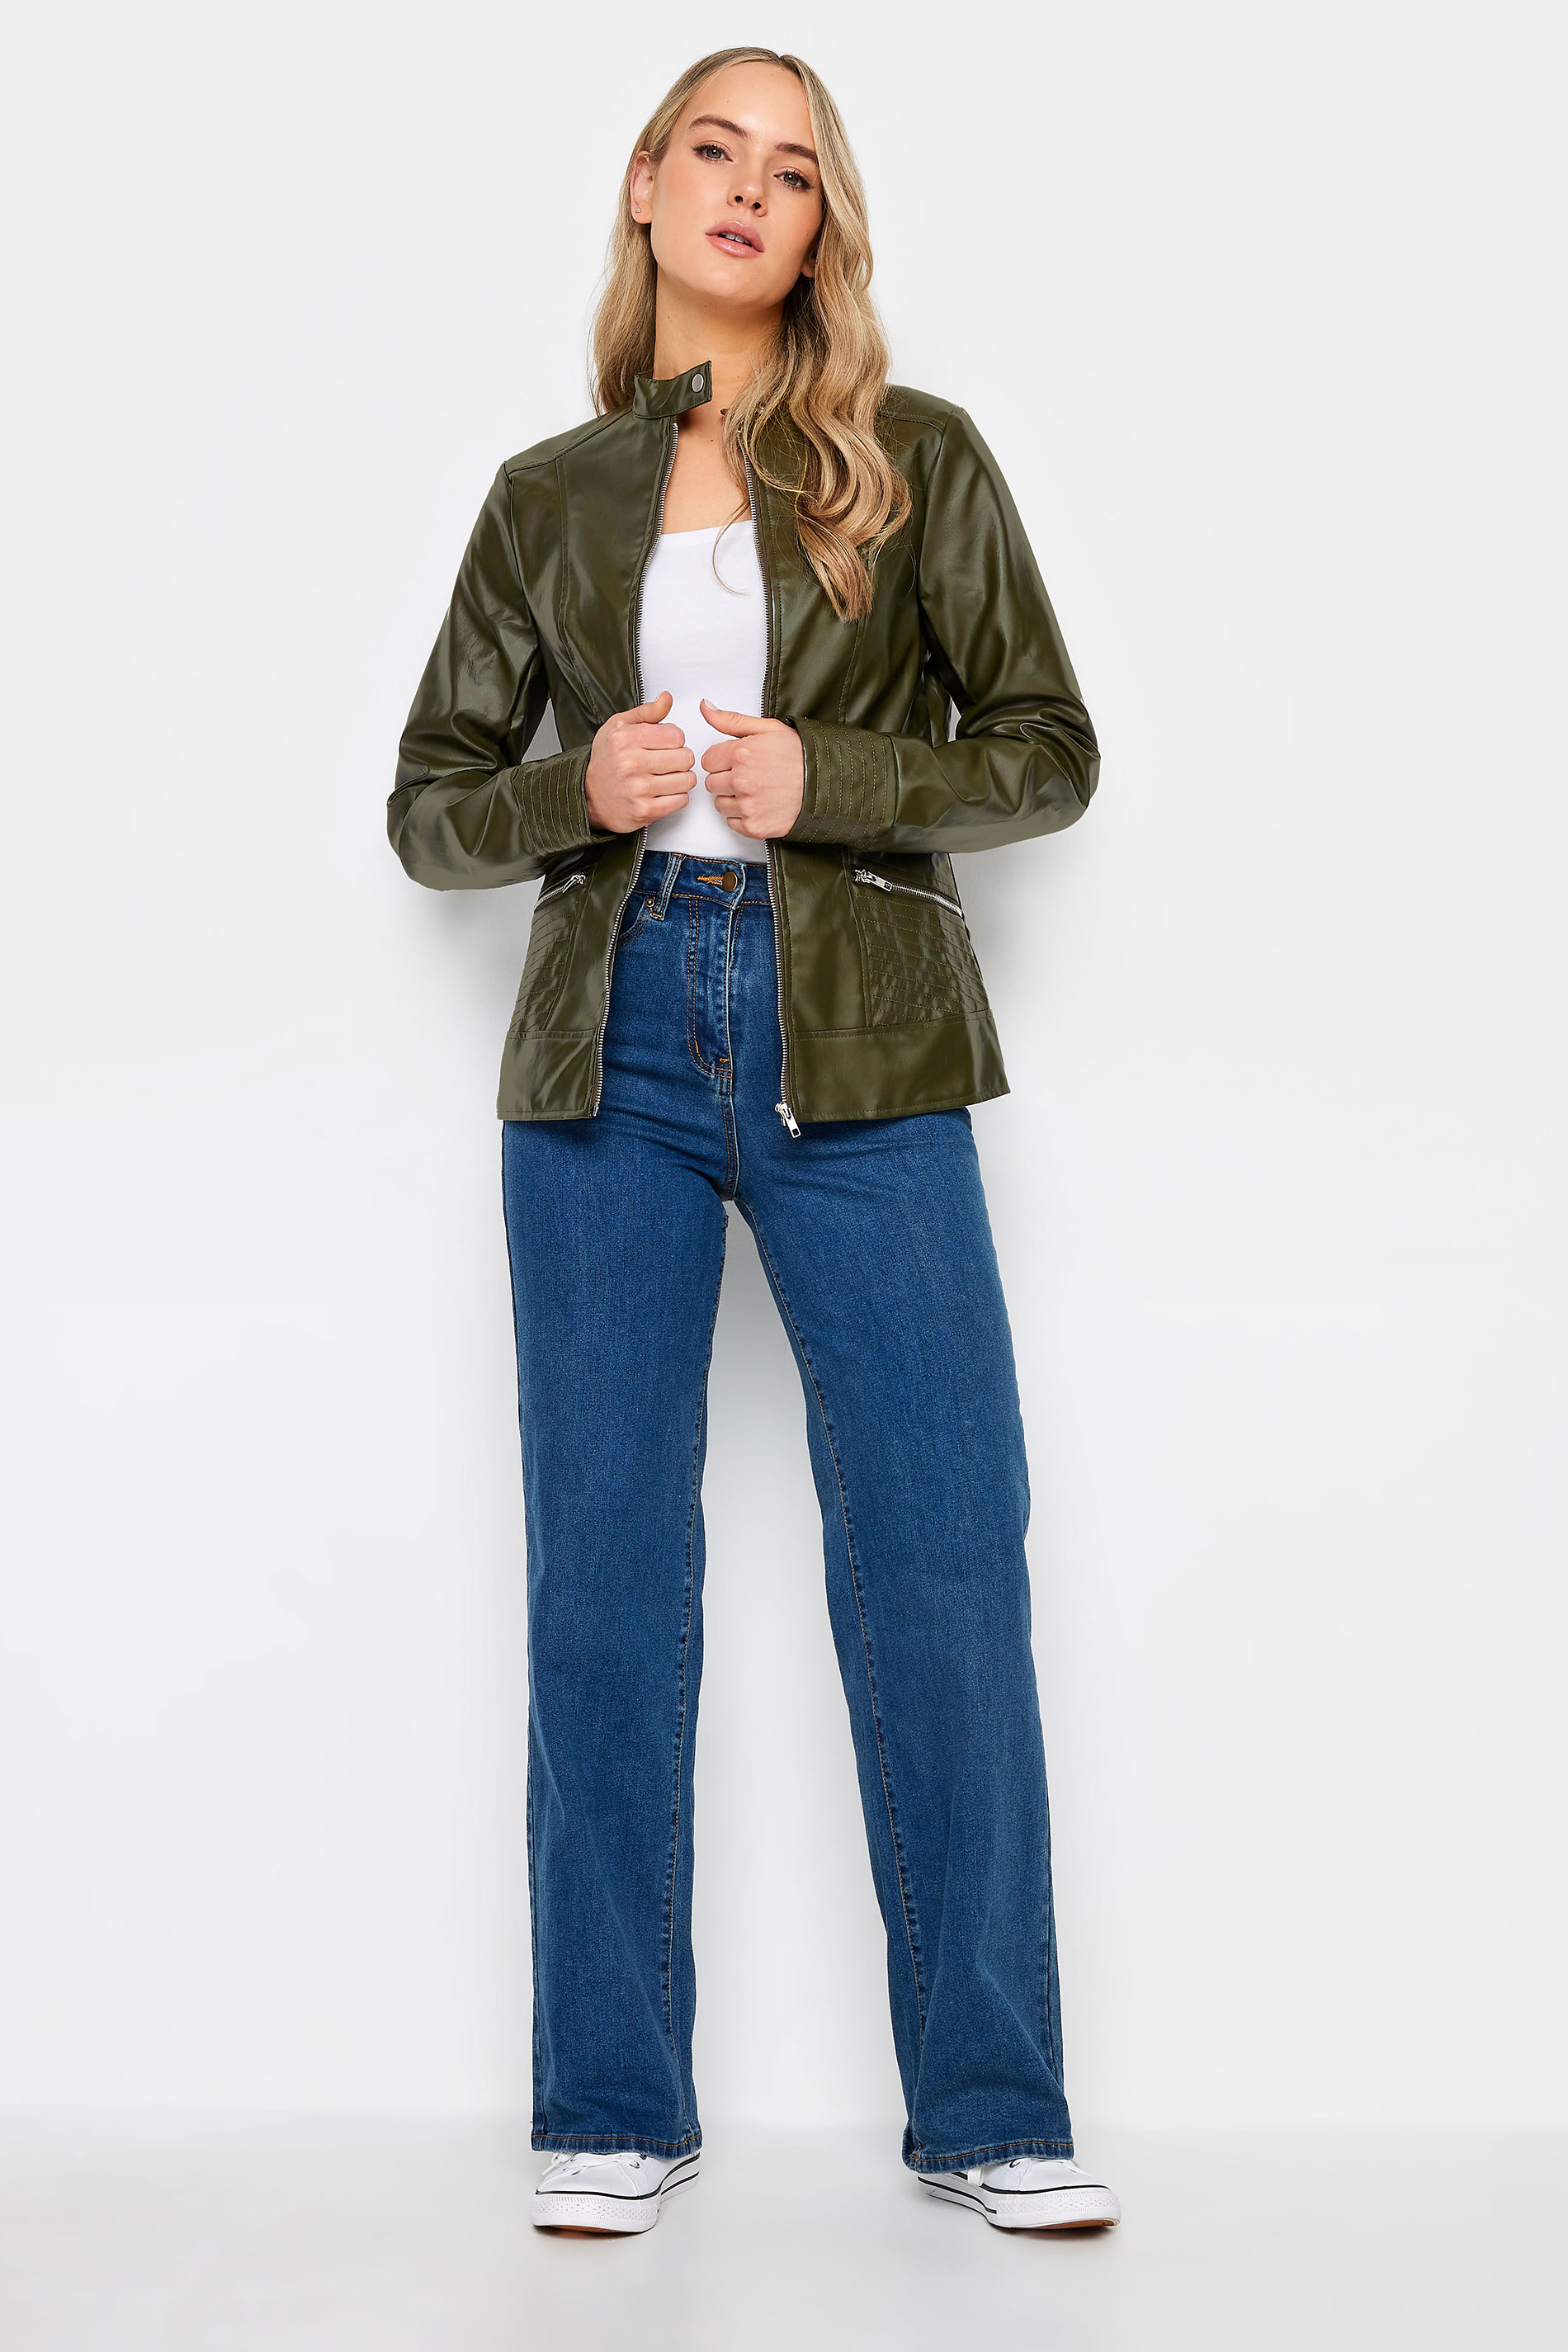 LTS Tall Khaki Green Faux Leather Funnel Neck Jacket | Long Tall Sally  2